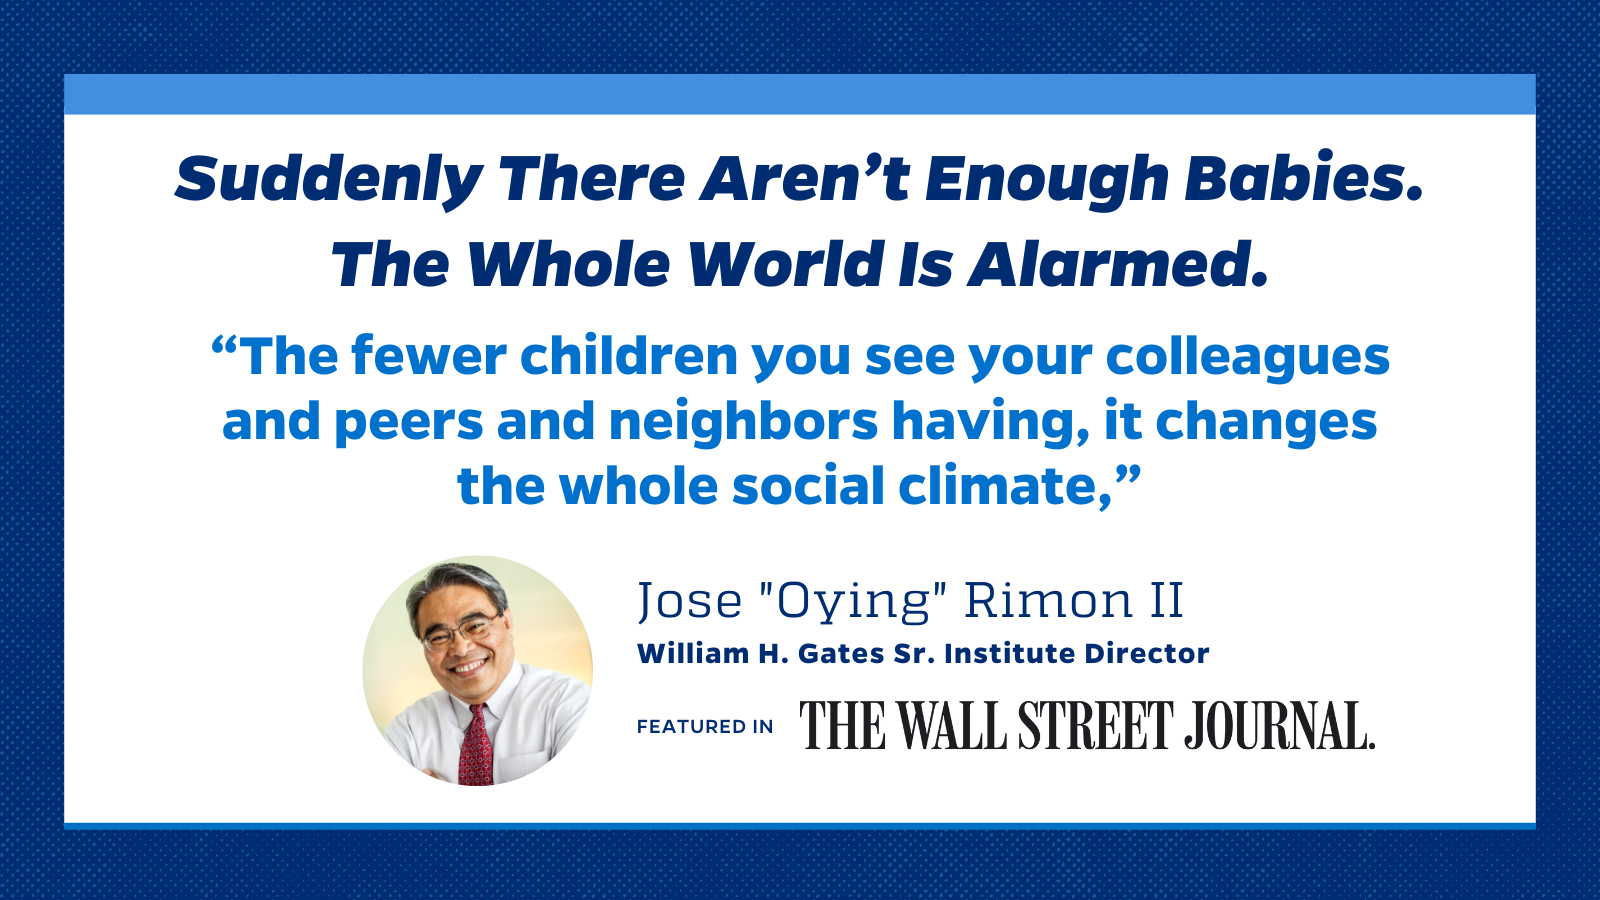 WHGI Director Jose “Oying” Rimon Quoted on Falling Birthrates in New Wall Street Journal Article